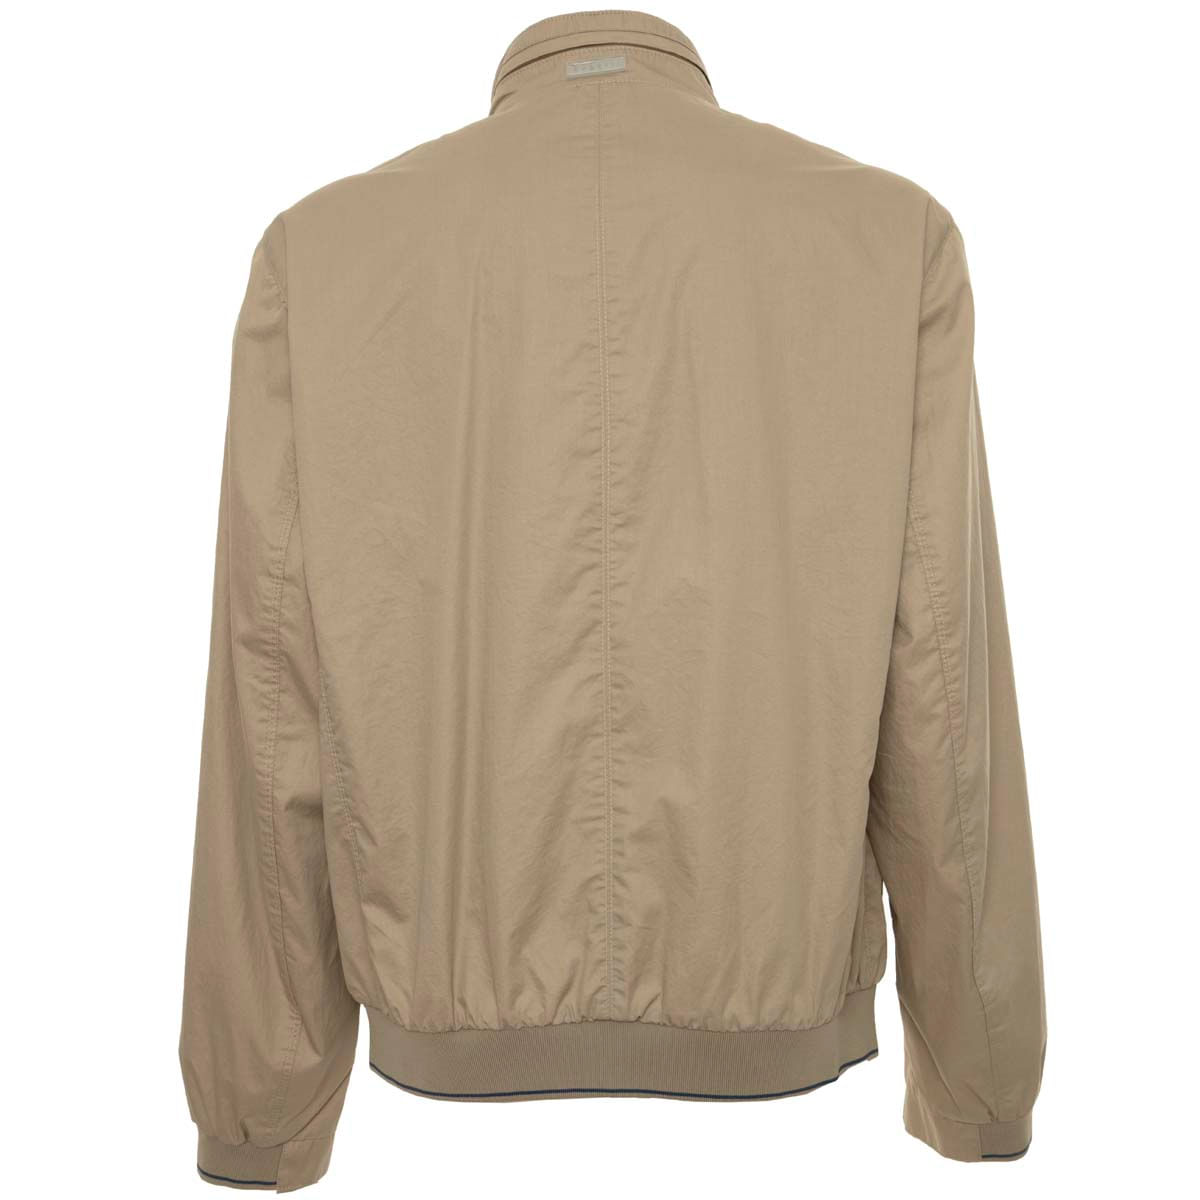 BUGATTI - Beige spring jacket with multipockets on